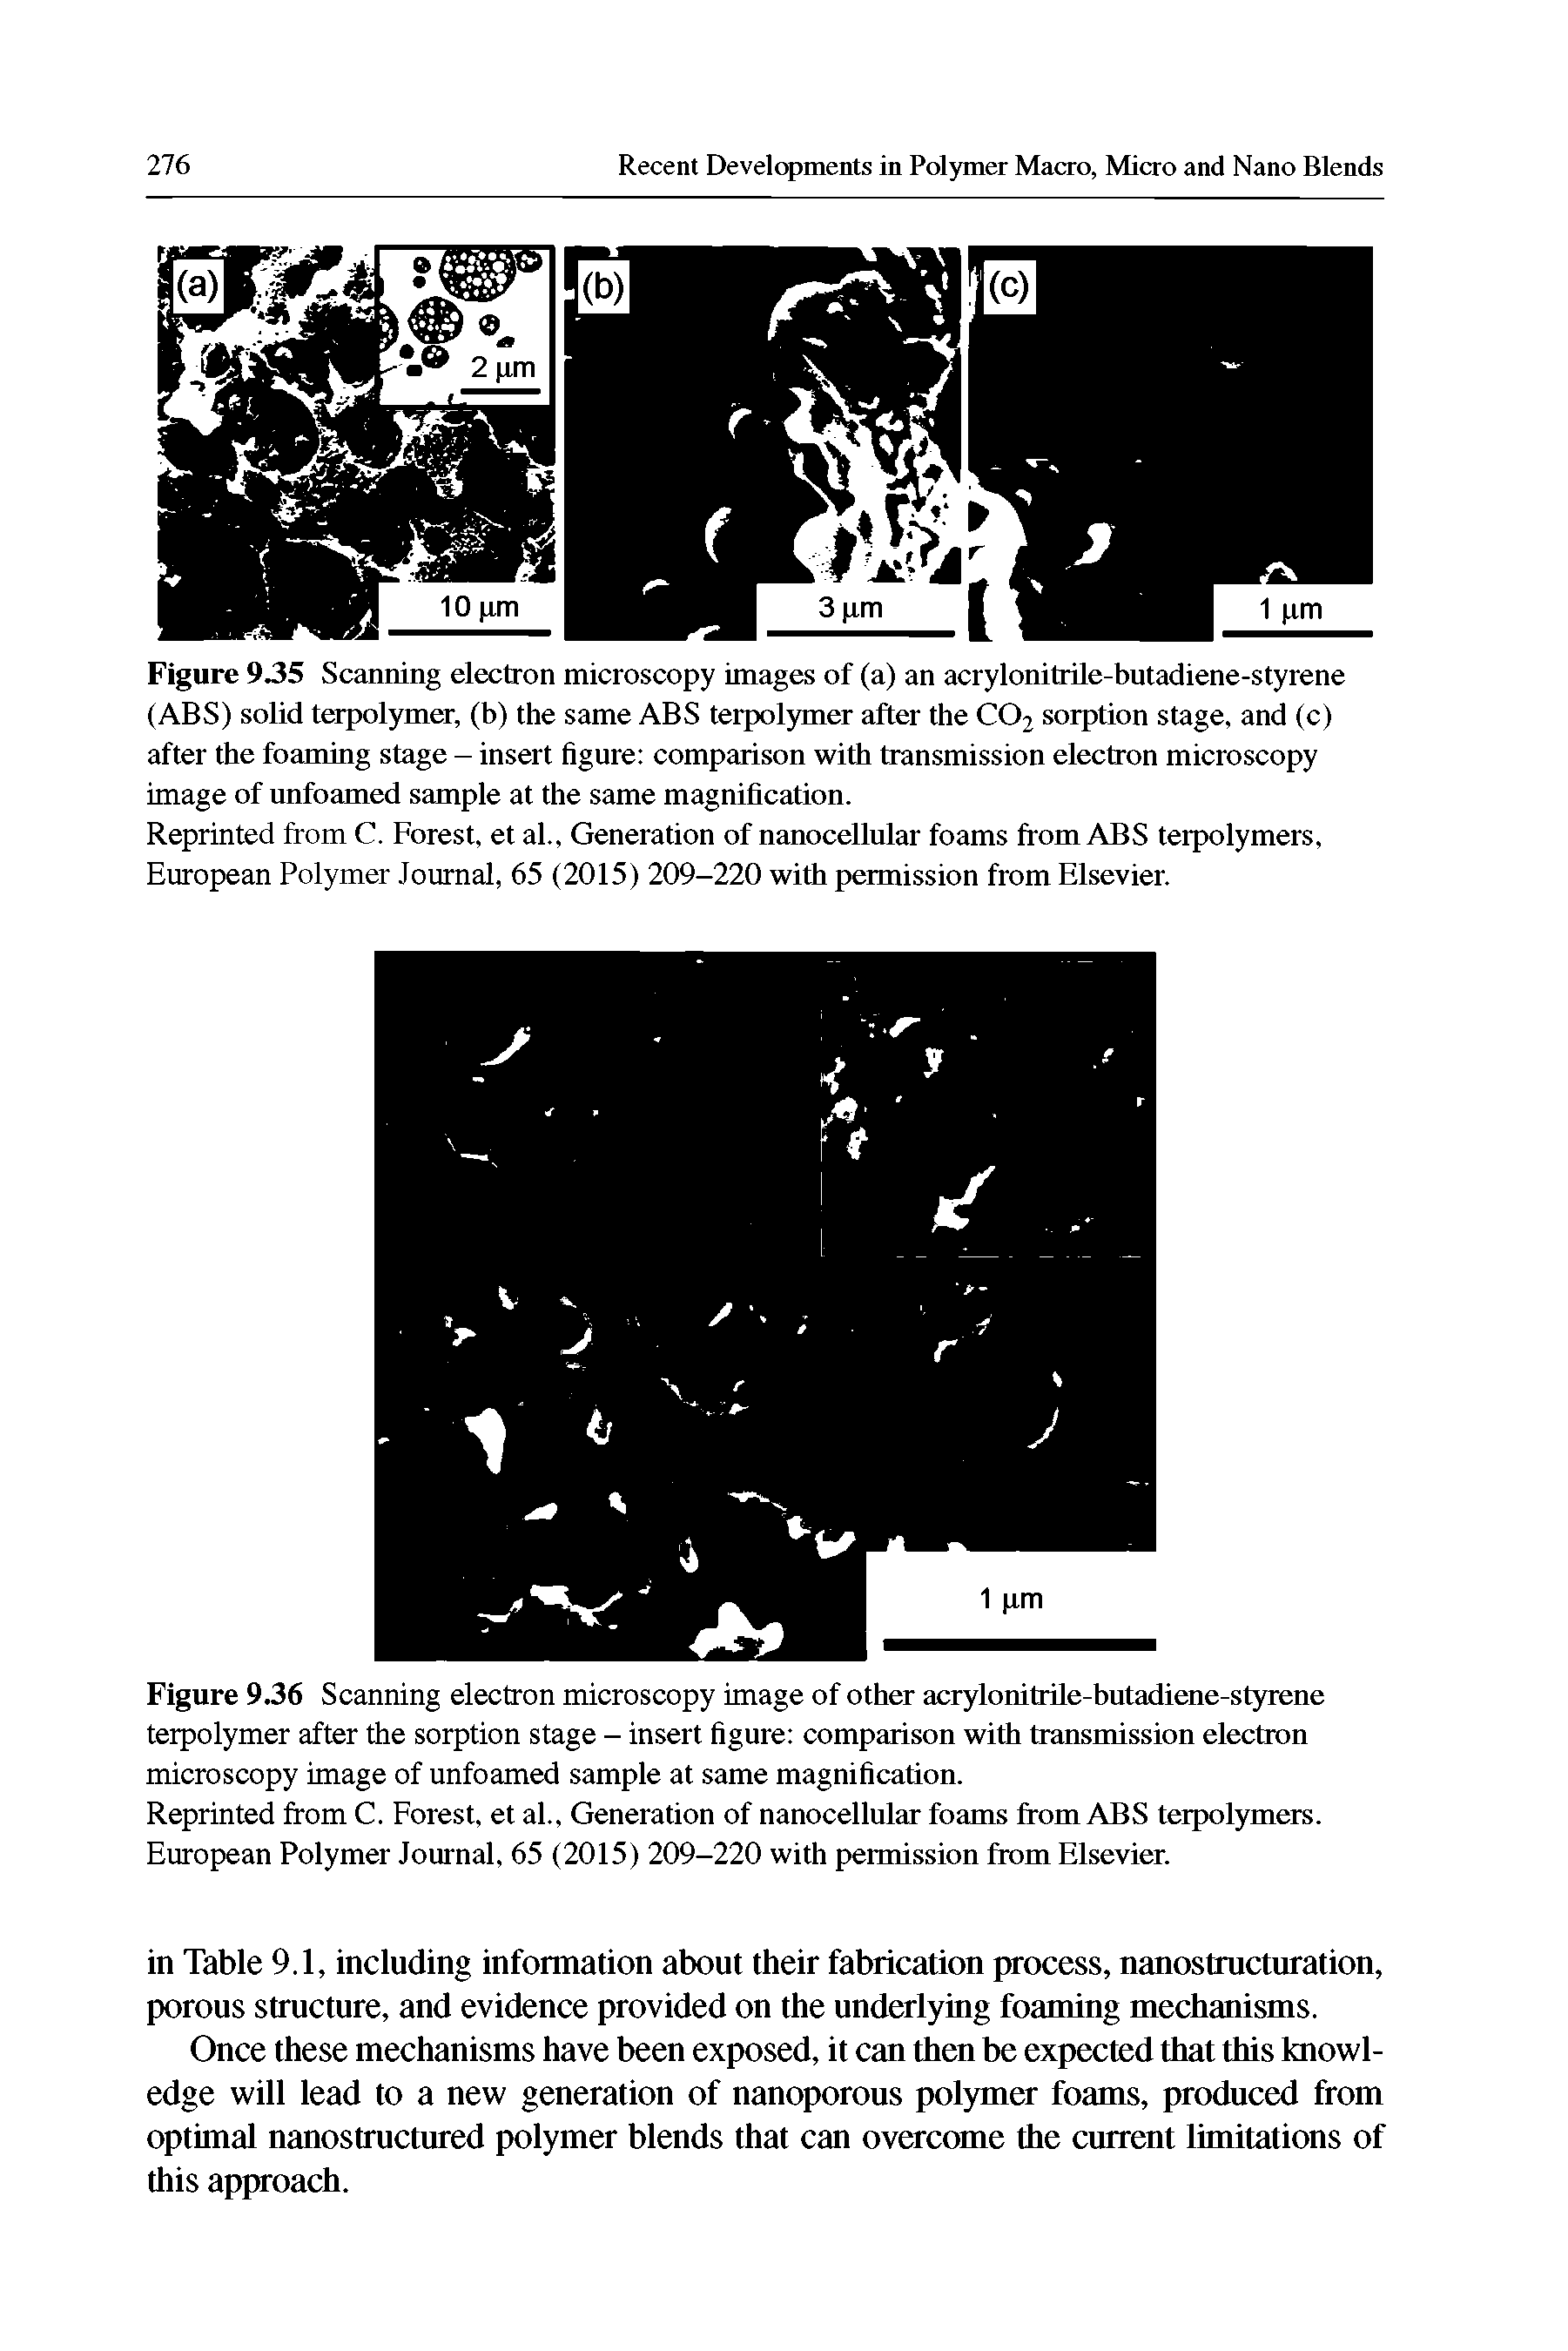 Figure 935 Scanning electron microscopy images of (a) an acrylonitrile-butadiene-styrene (ABS) solid terpolymer, (b) the same ABS terpolymer after the CO2 sorption stage, and (c) after the foaming stage - insert figure comparison with transmission electron microscopy image of unfoamed sample at the same magnification.